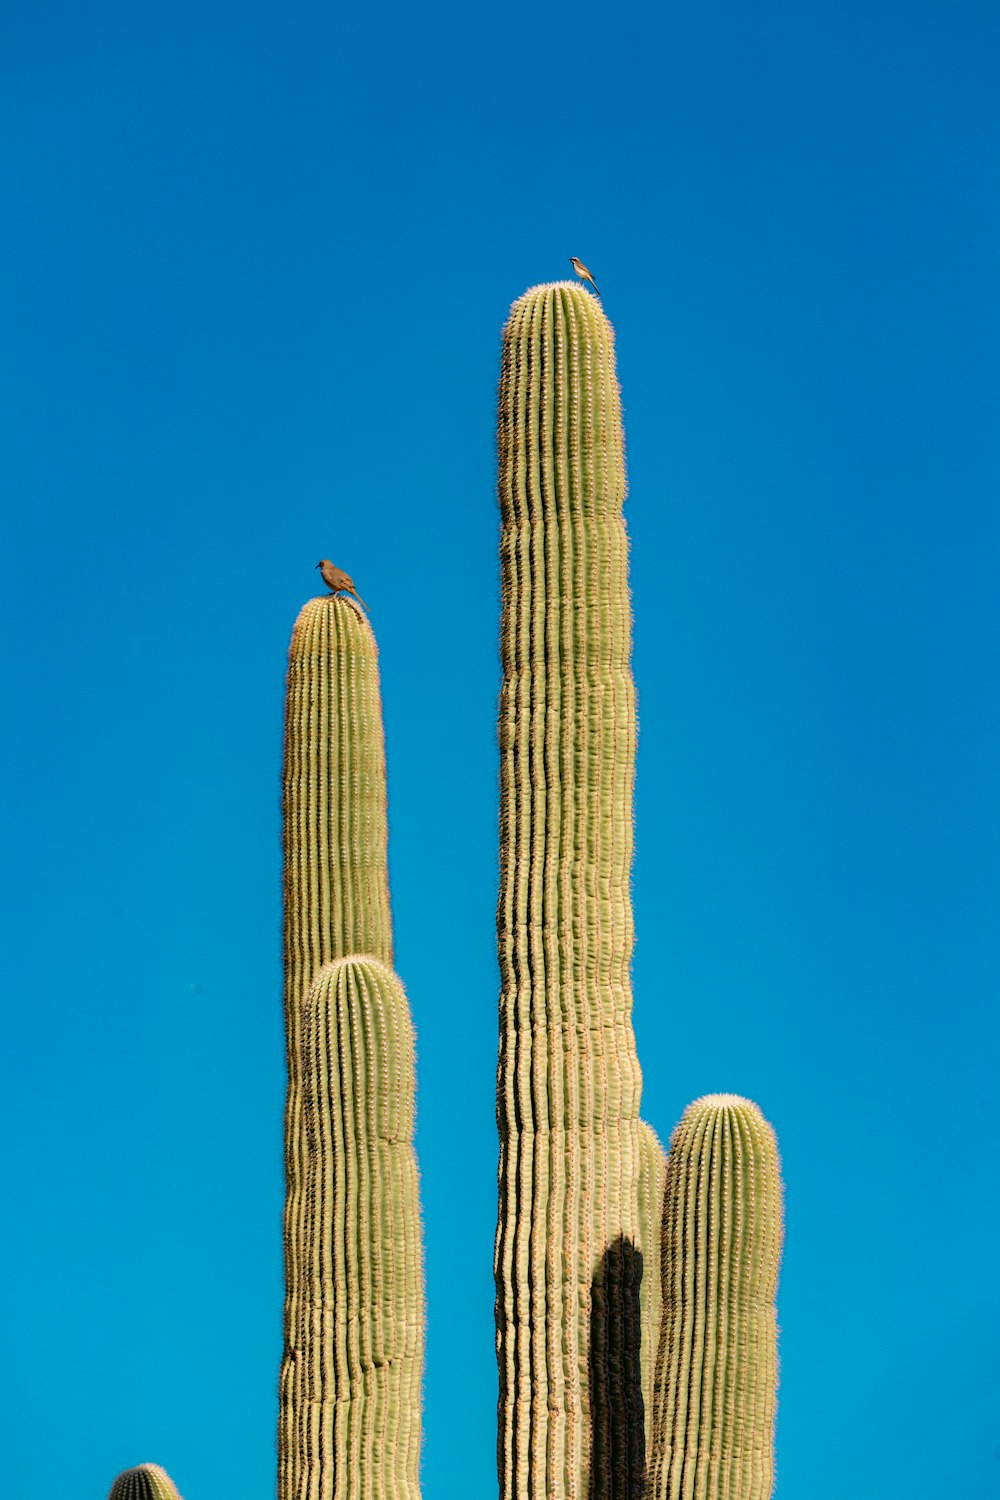 a bird perched on top of a tall cactus